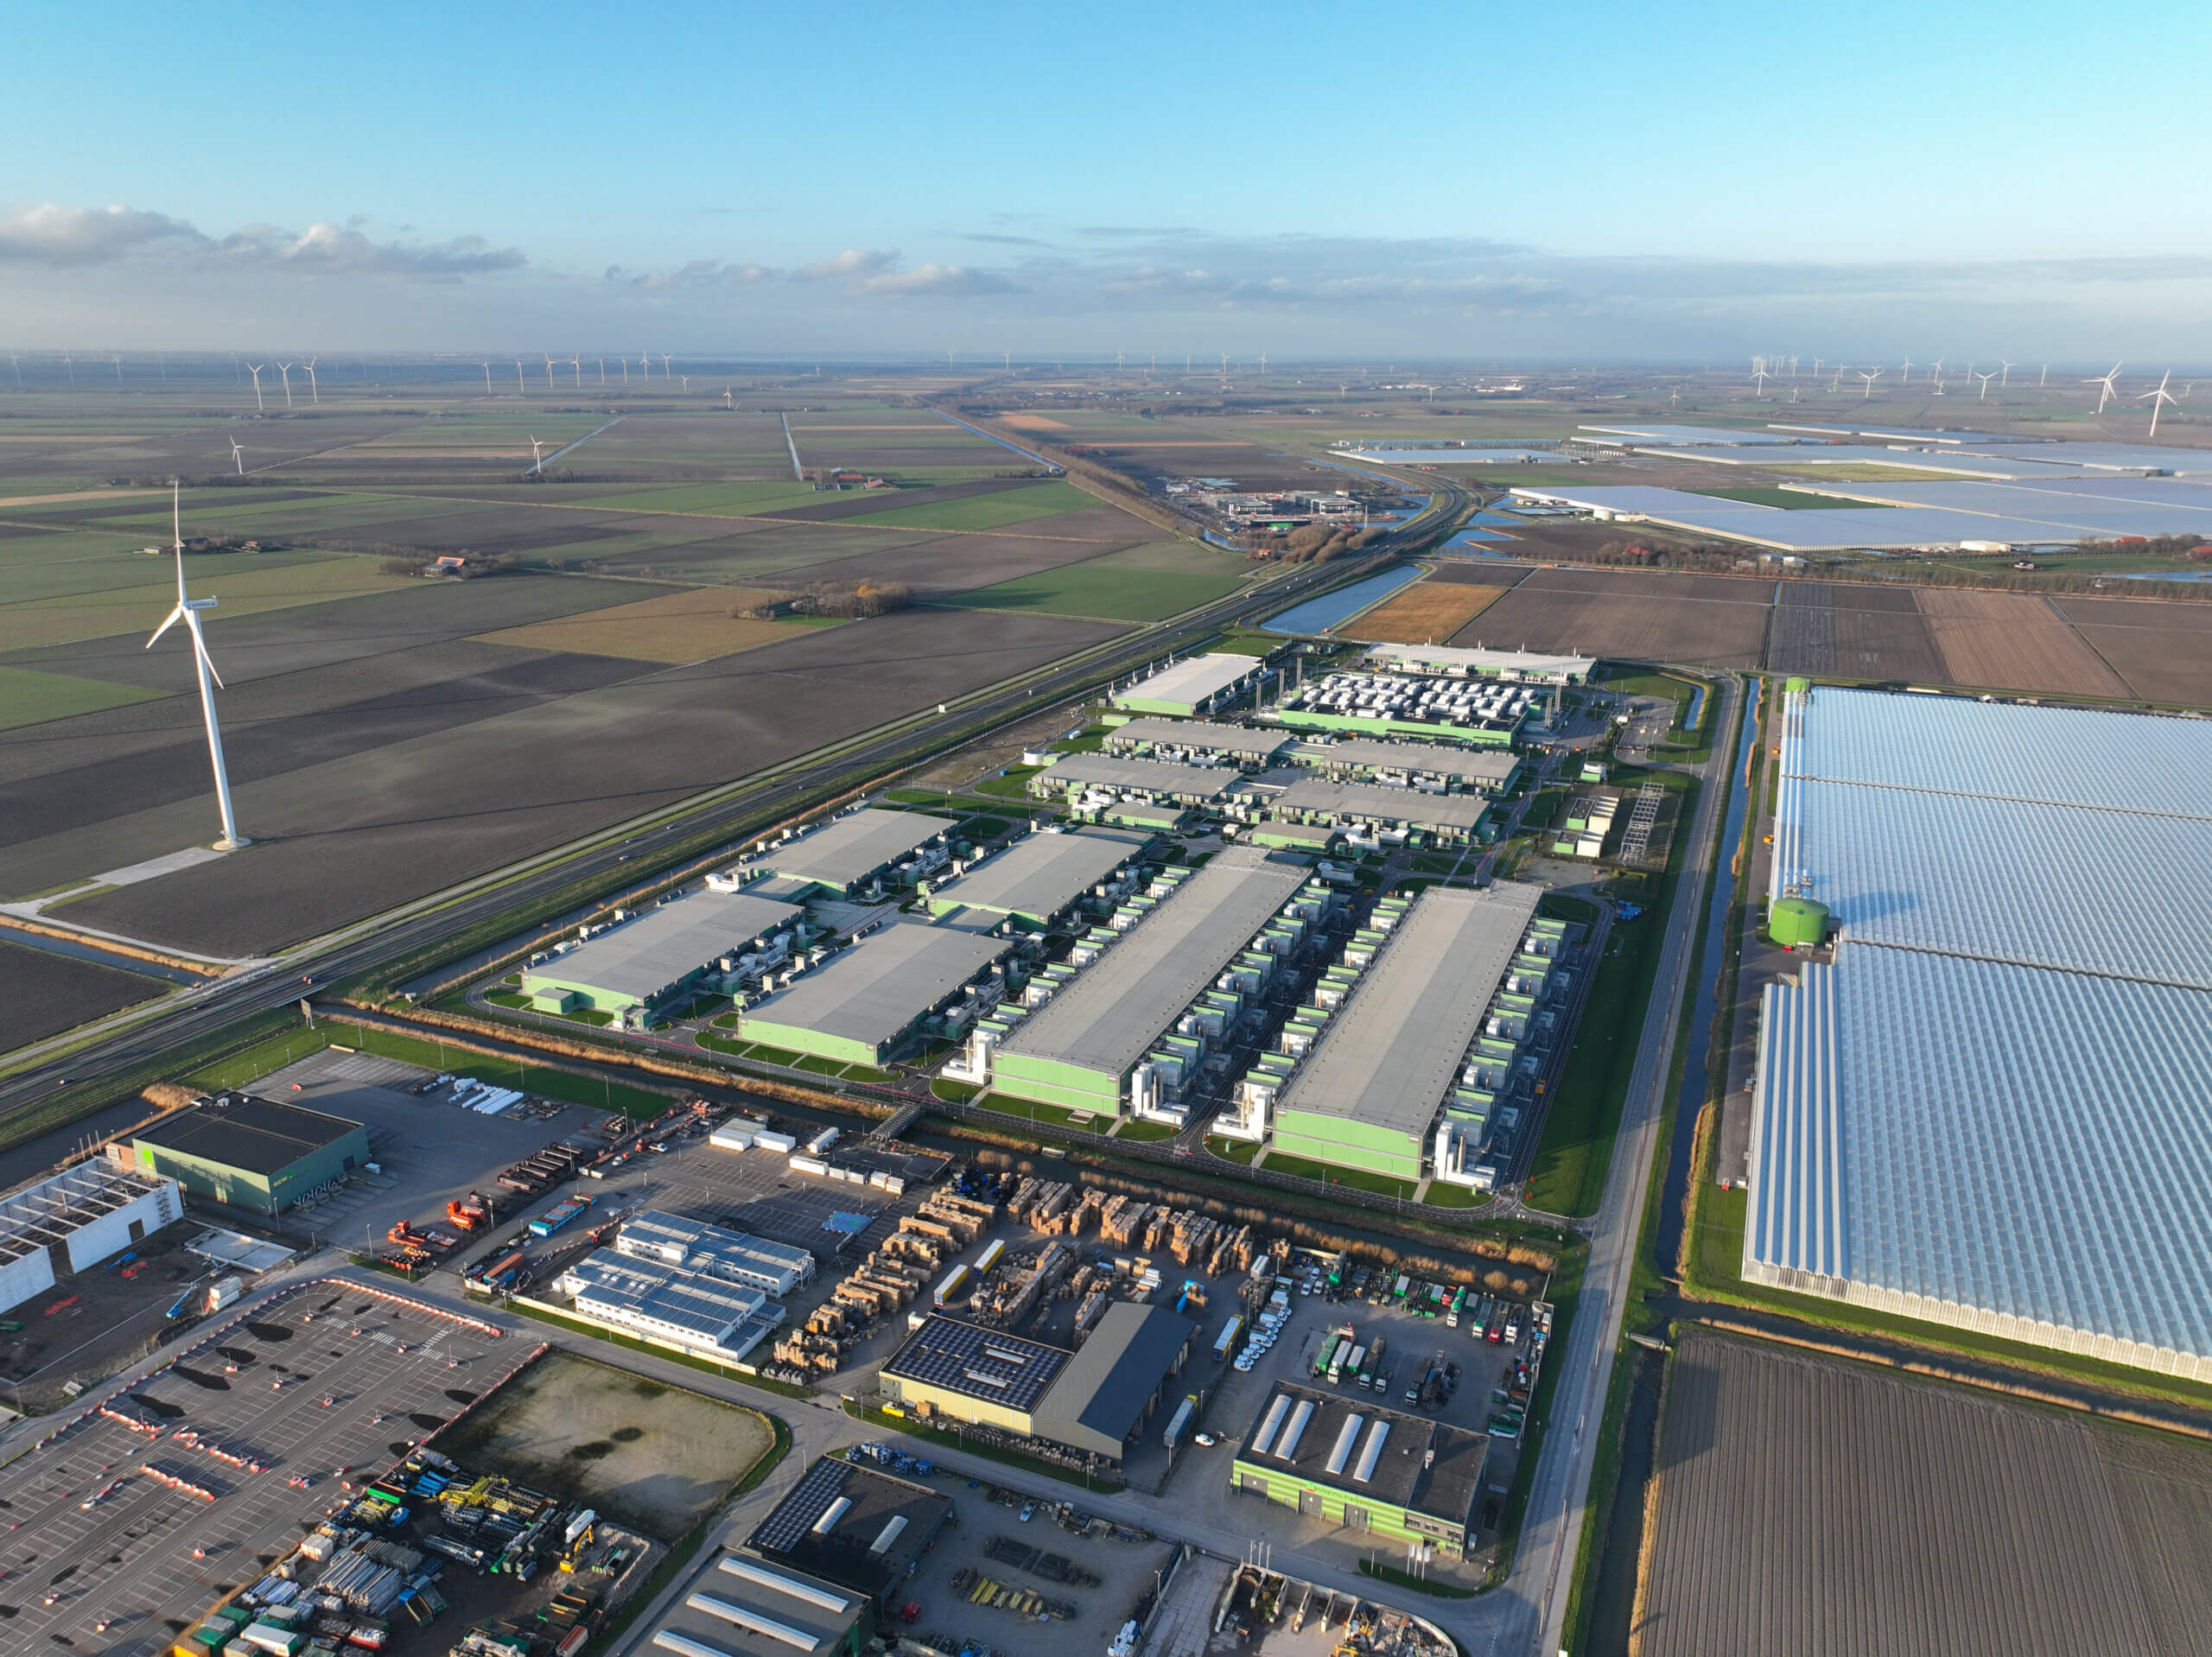 Datacenter building computing and data infrastructure. Aerial drone overhead view. Hollands kroon industrial zone. Landscape aerial.